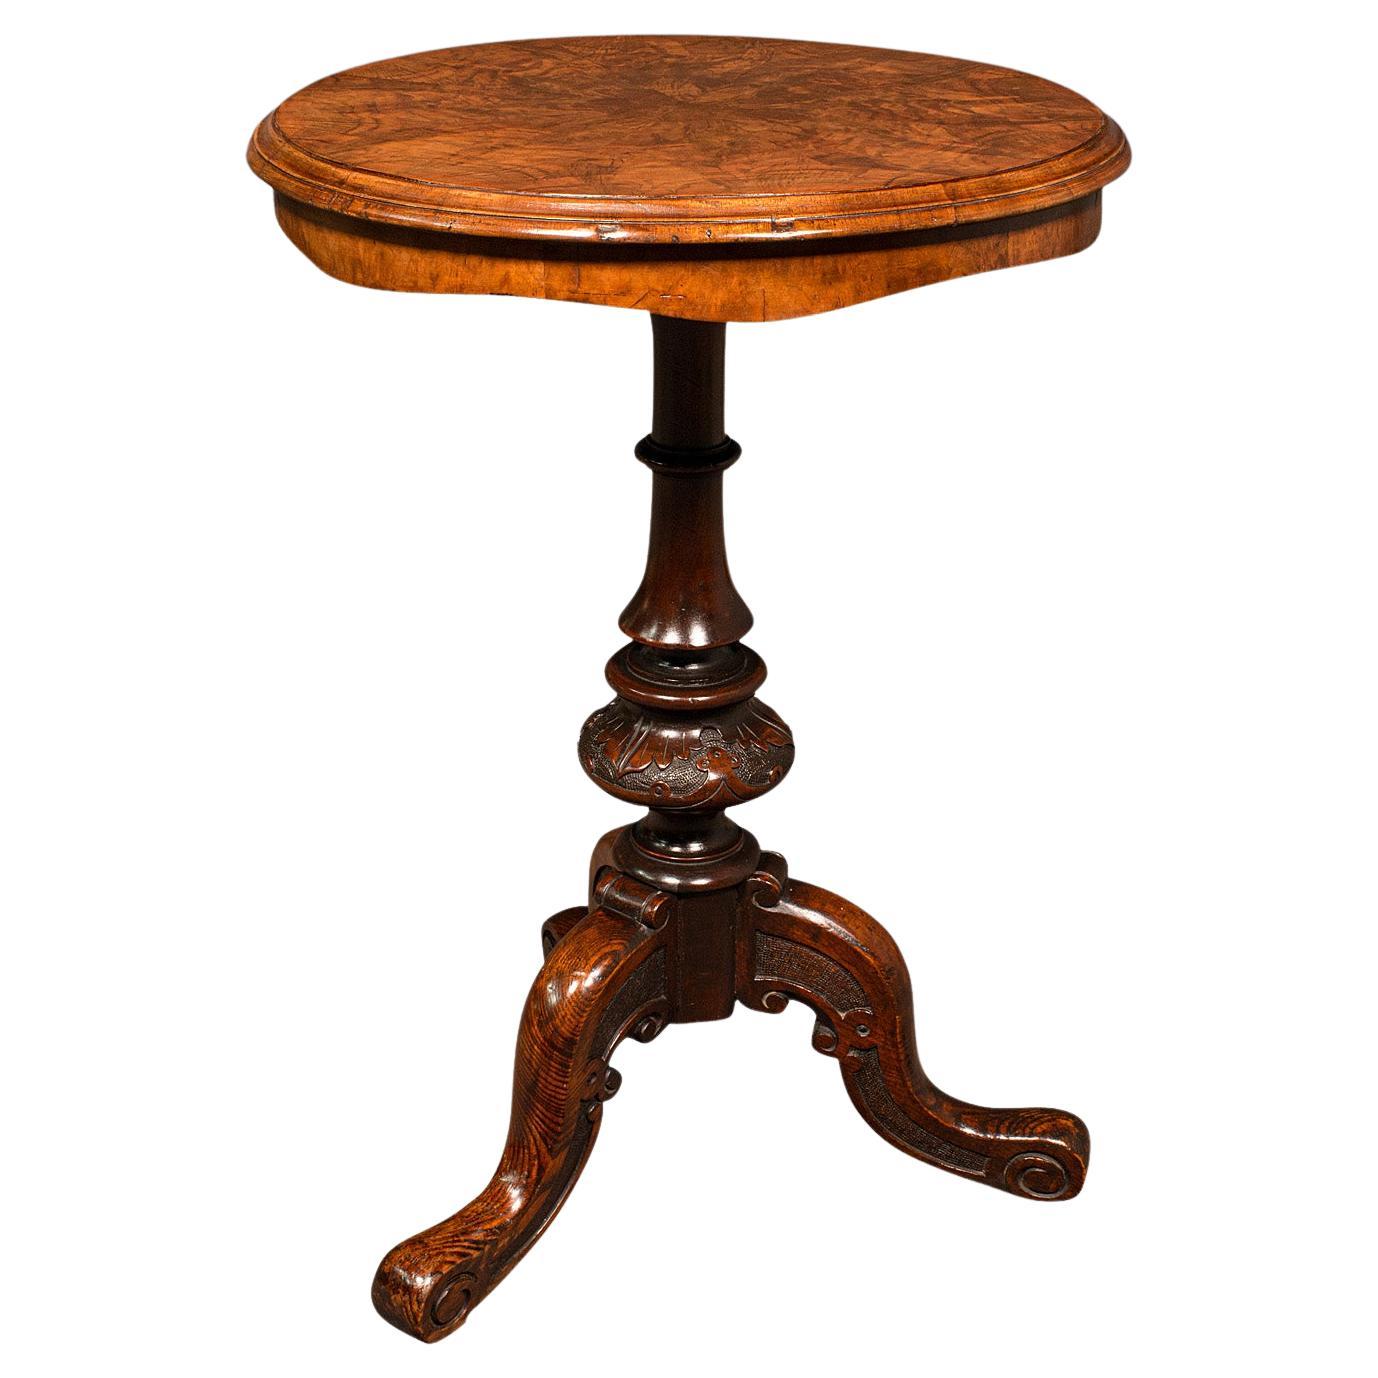 Antique Lamp Table, English Burr Walnut, Decorative, Occasional, Early Victorian